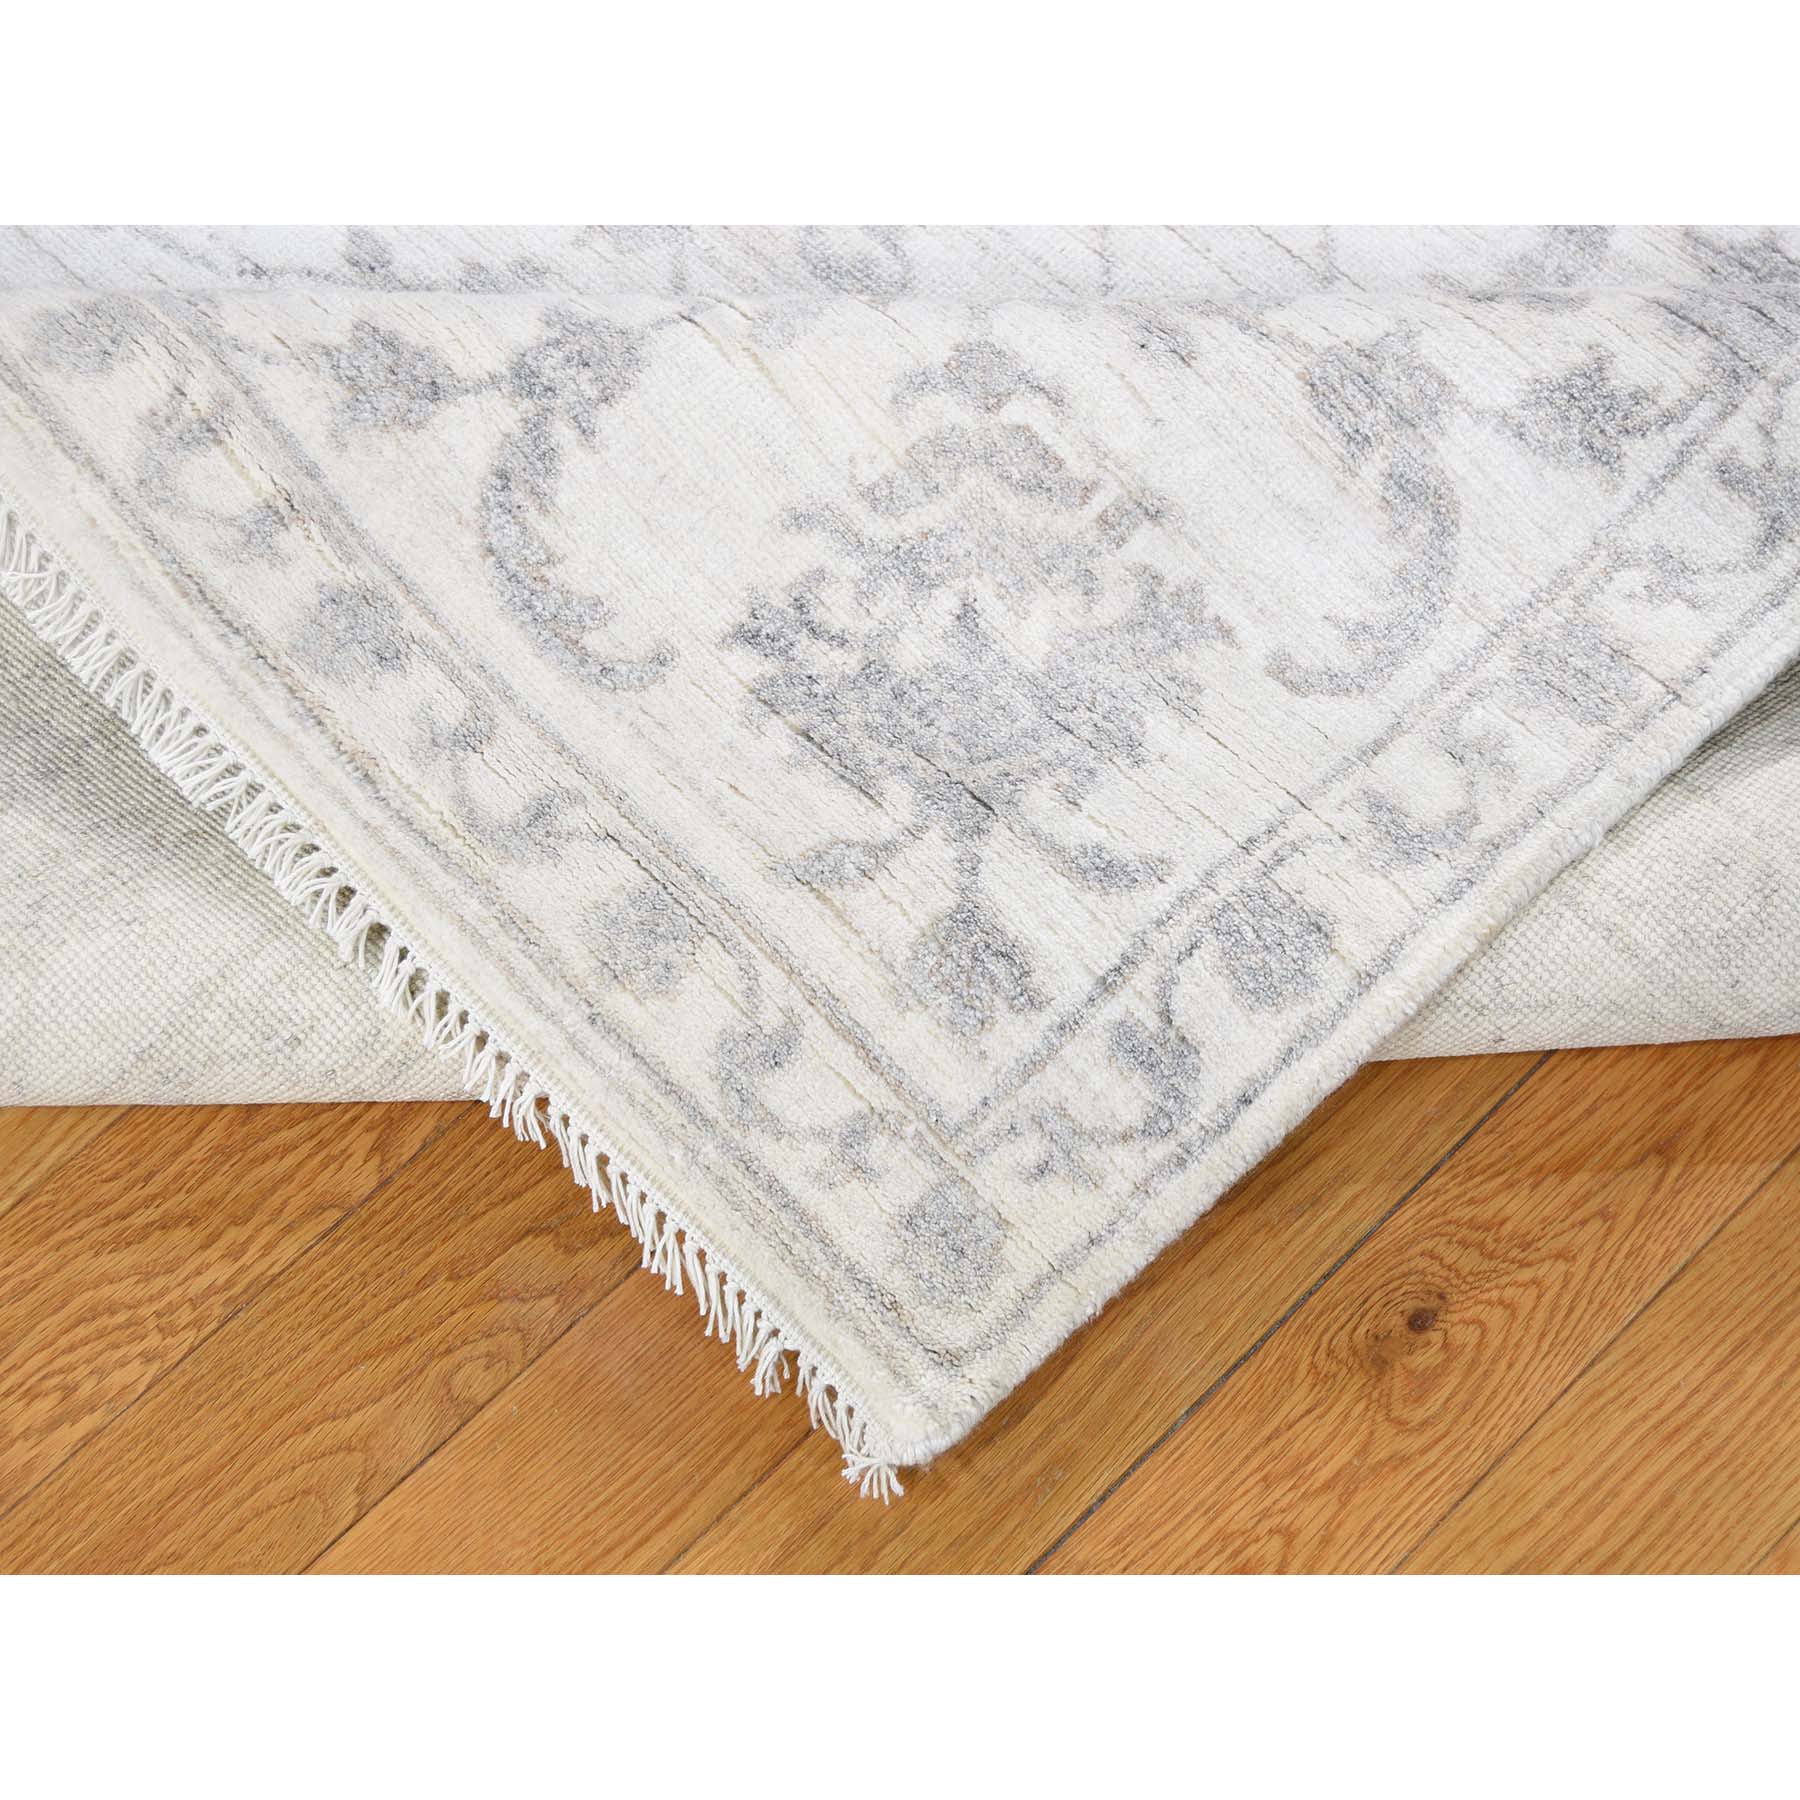 8-1 x10-3  Wool and Silk Tone on Tone Agra Hand-Knotted Oriental Rug 